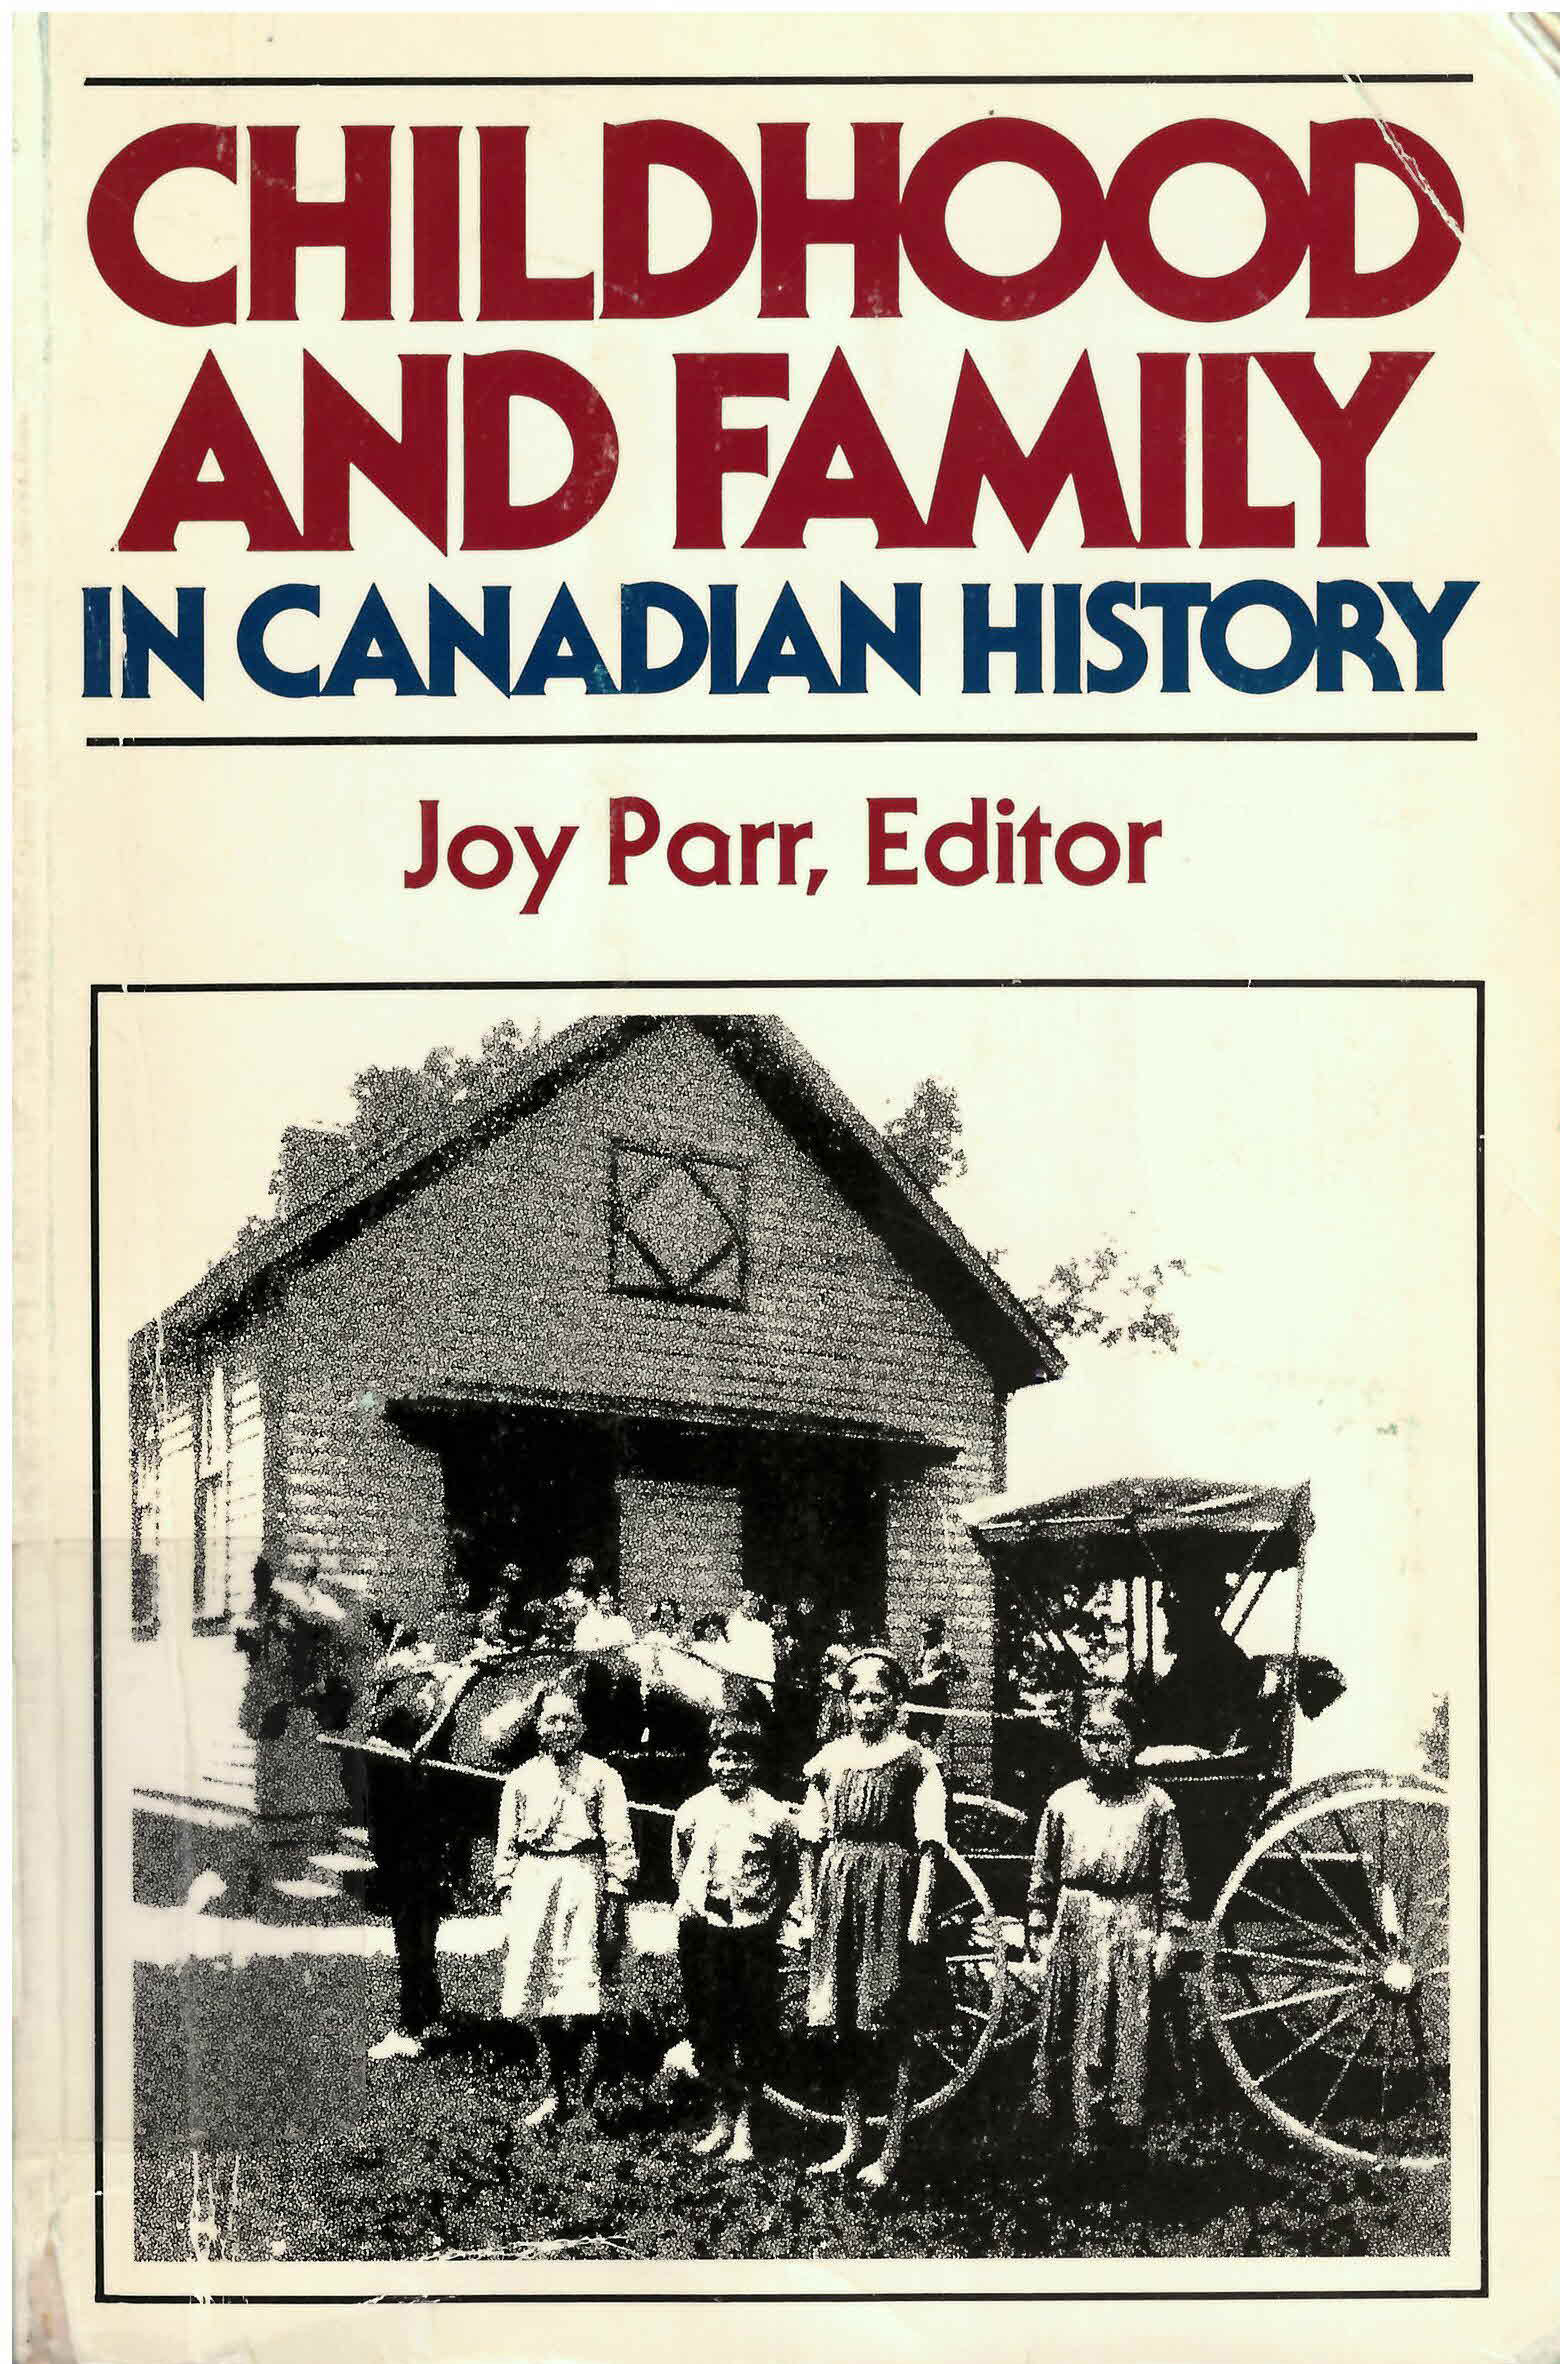 Childhood and family in Canadian history